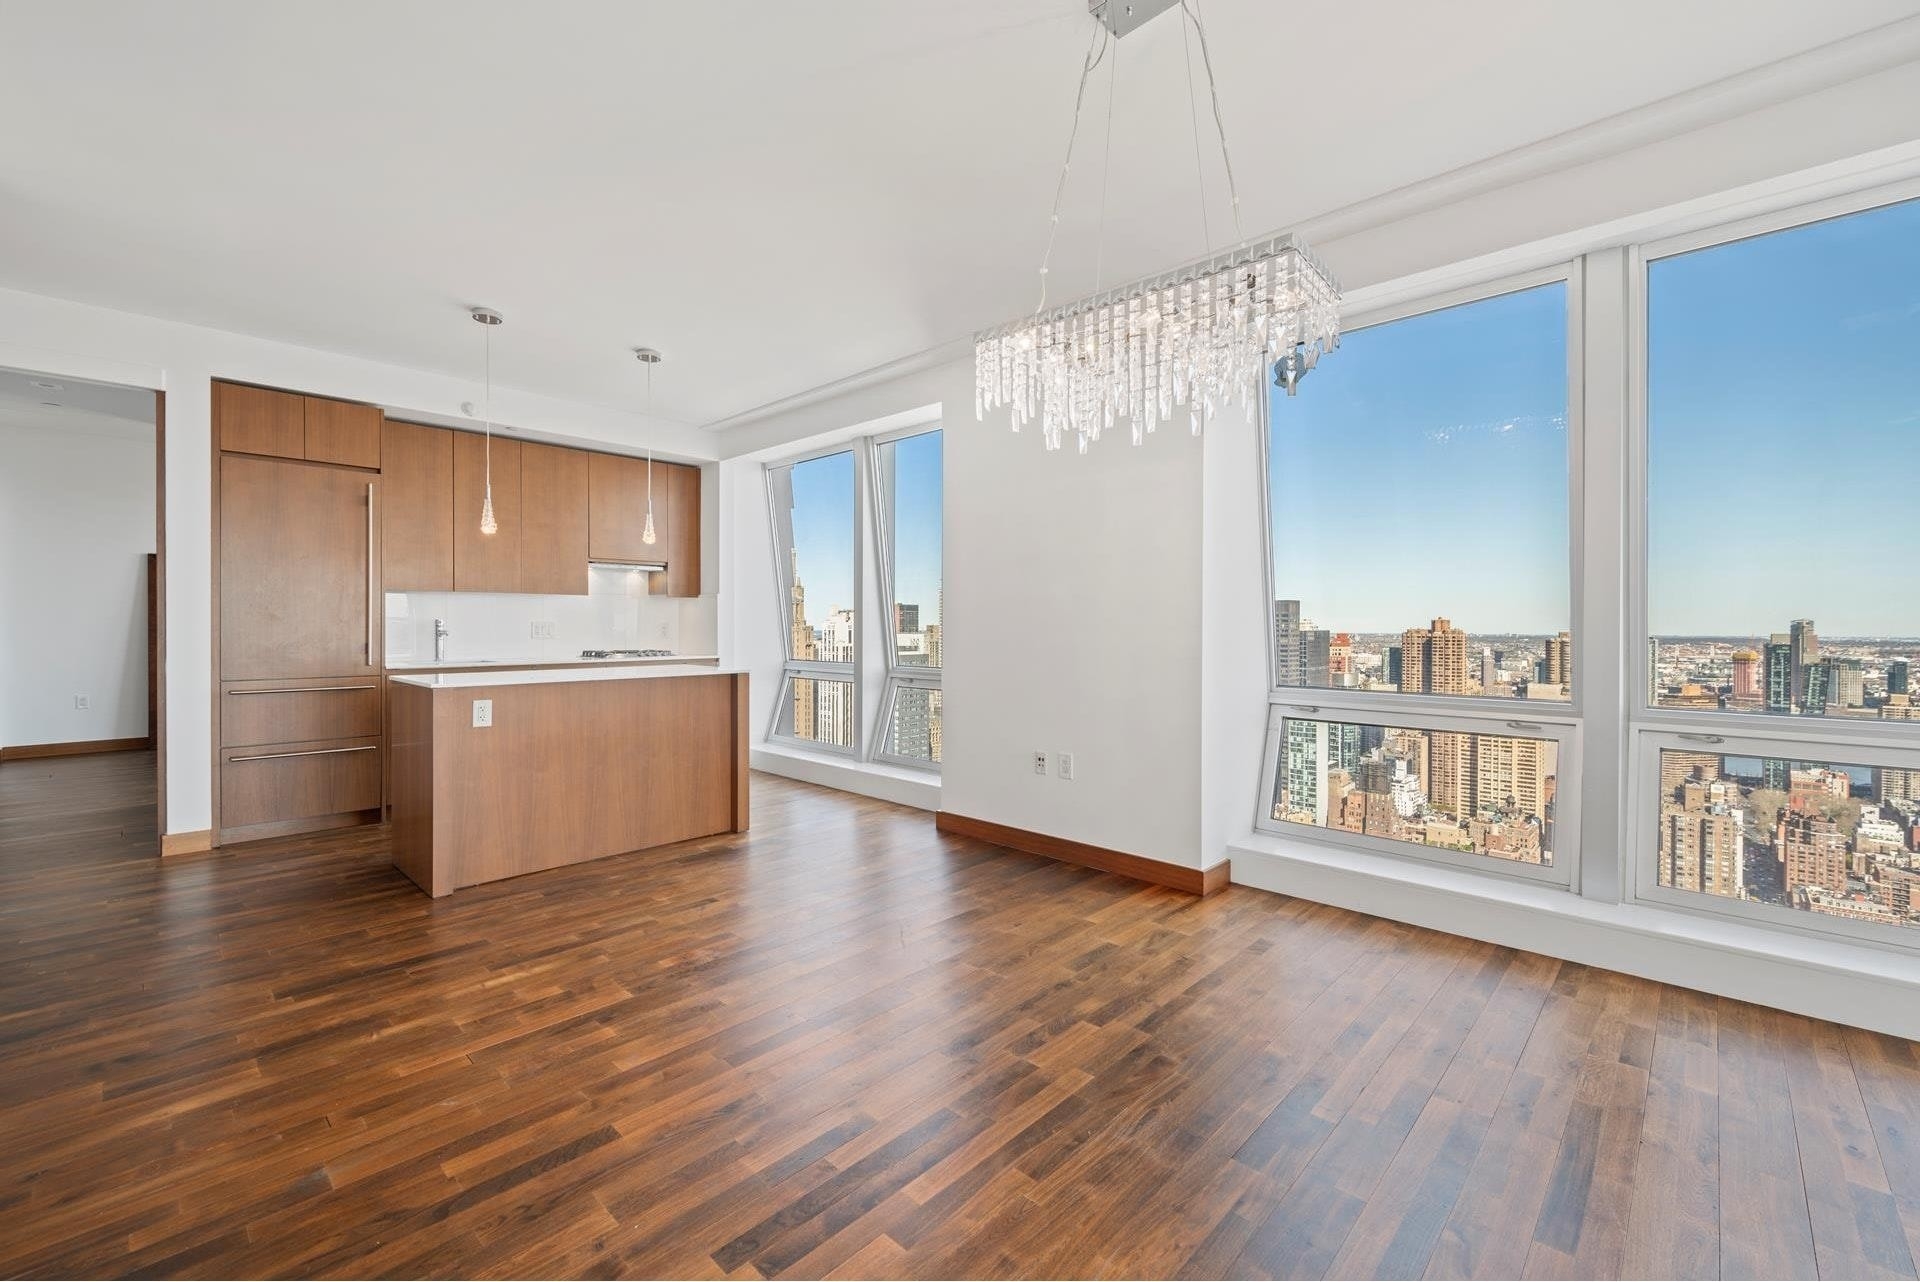 3. Rentals at Residences-Langham, 400 FIFTH AVE, 51A Midtown West, New York, New York 10018